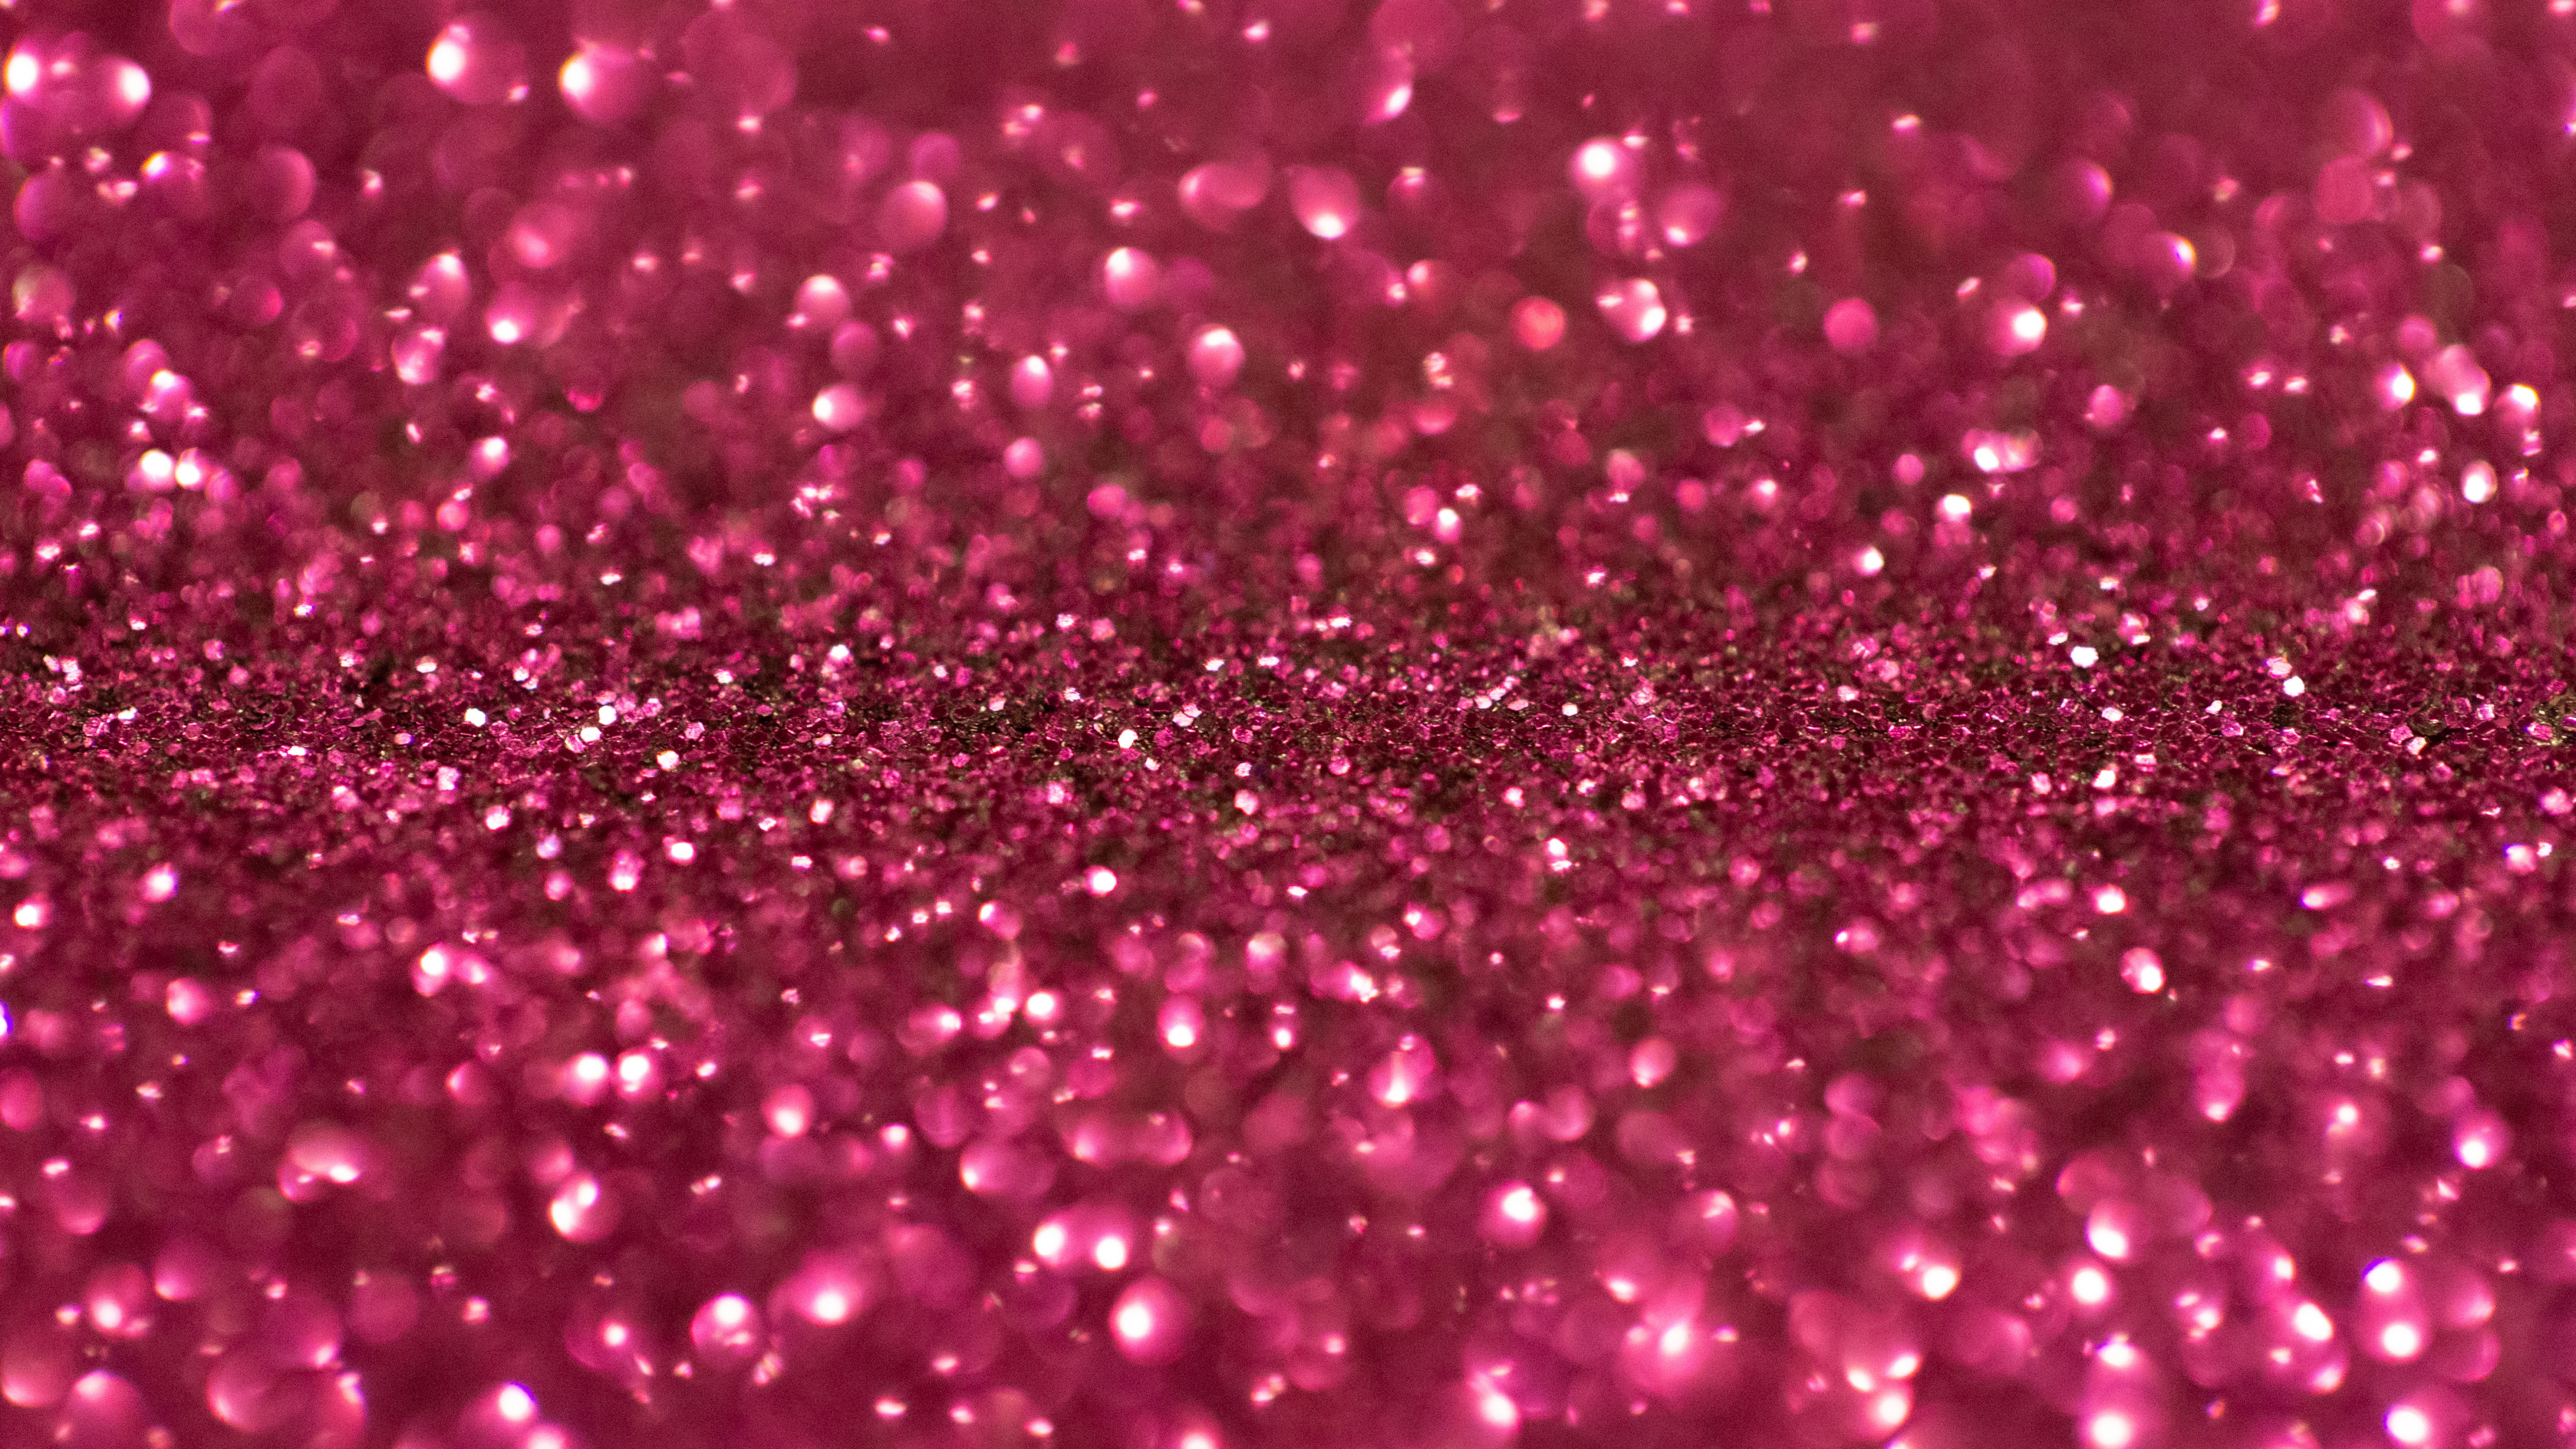 https://4kwallpapers.com/images/wallpapers/pink-glitter-shimmering-pink-background-shiny-sparkles-6016x3384-5936.jpg